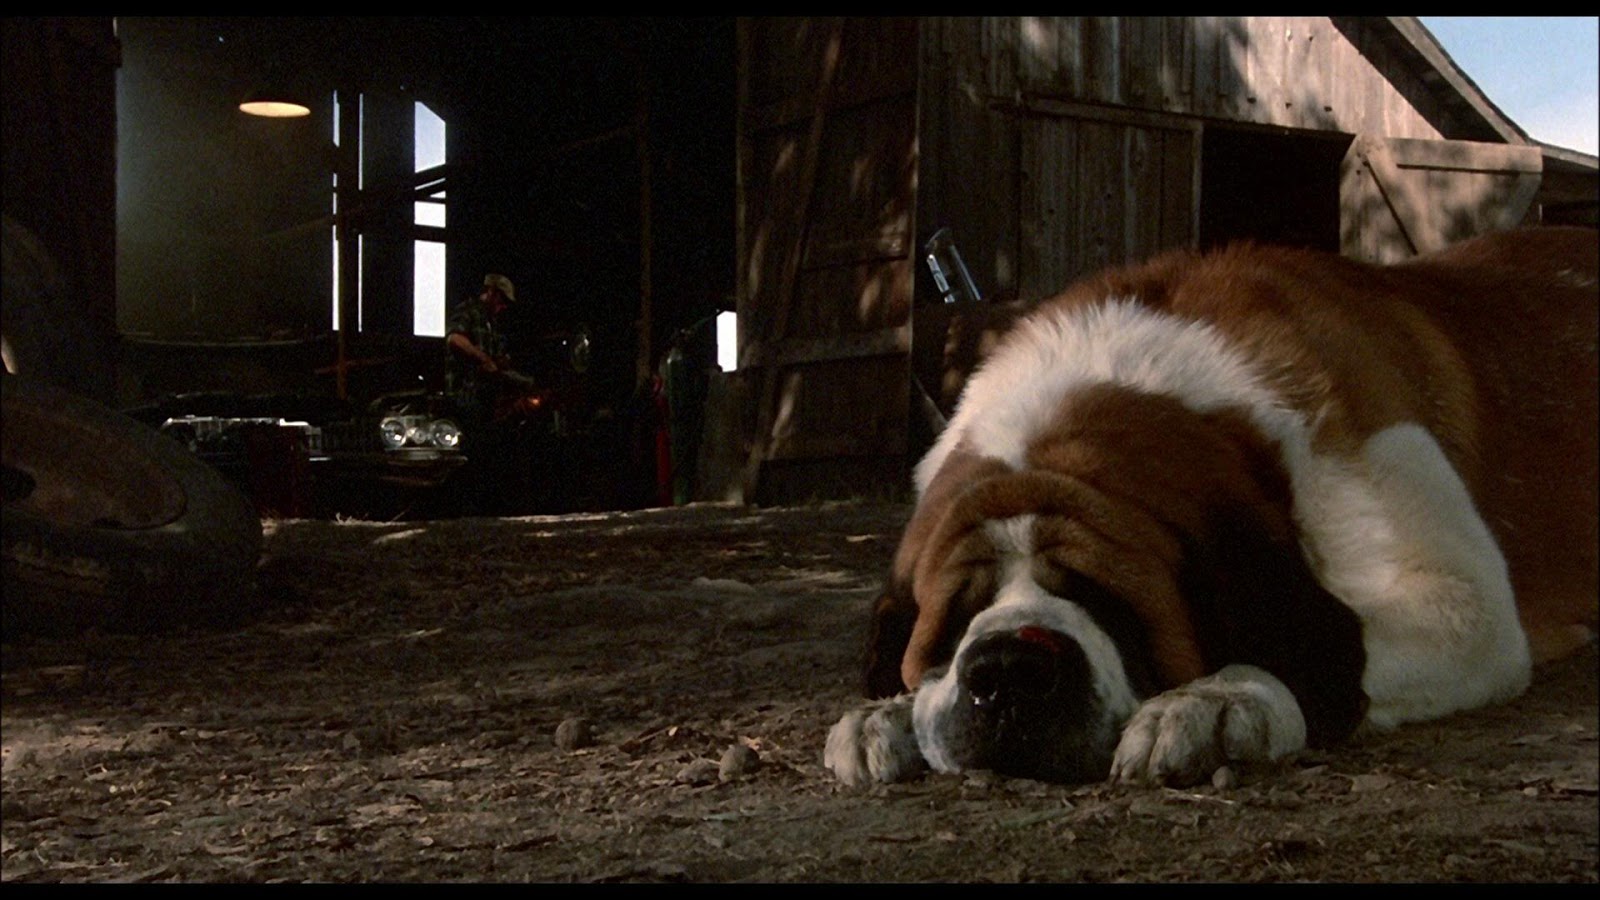 ...and we don't see Cujo again... 